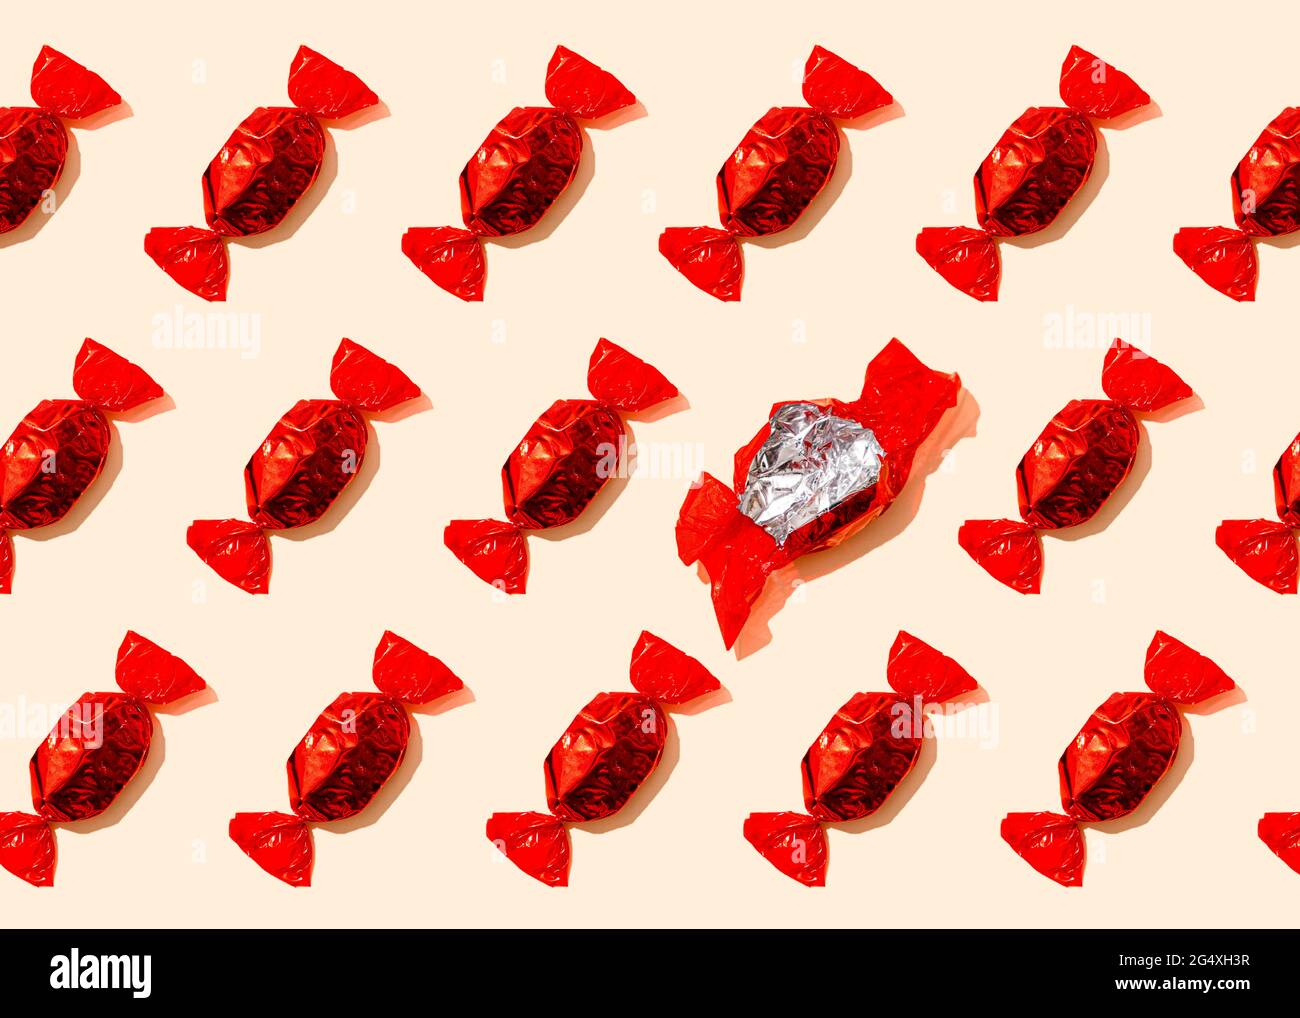 Pattern of rows of red wrapped candies with single empty wrapper Stock Photo